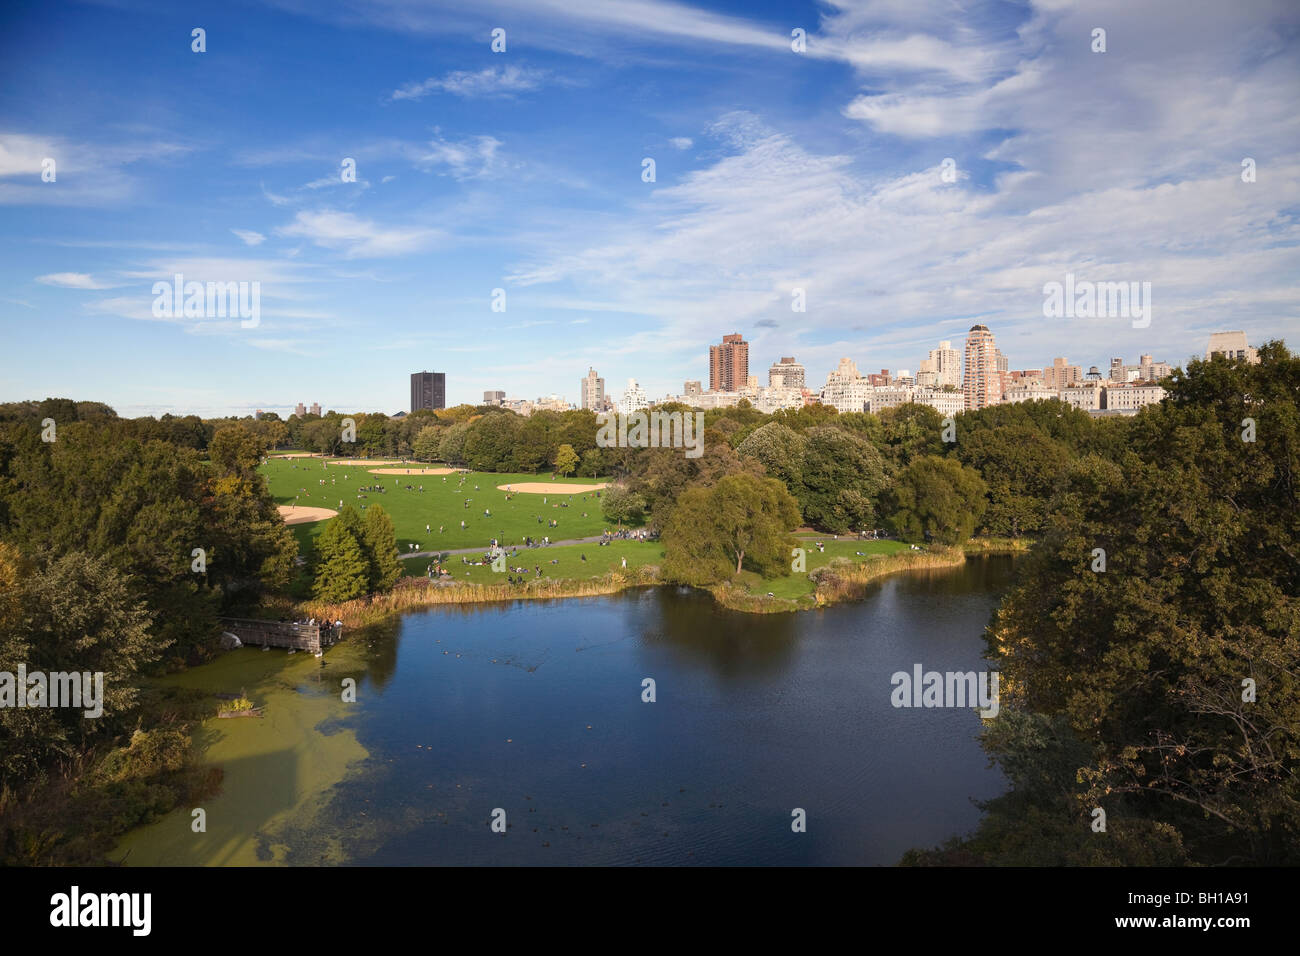 View from Belvedere Castle in Central Park in New York City. Stock Photo